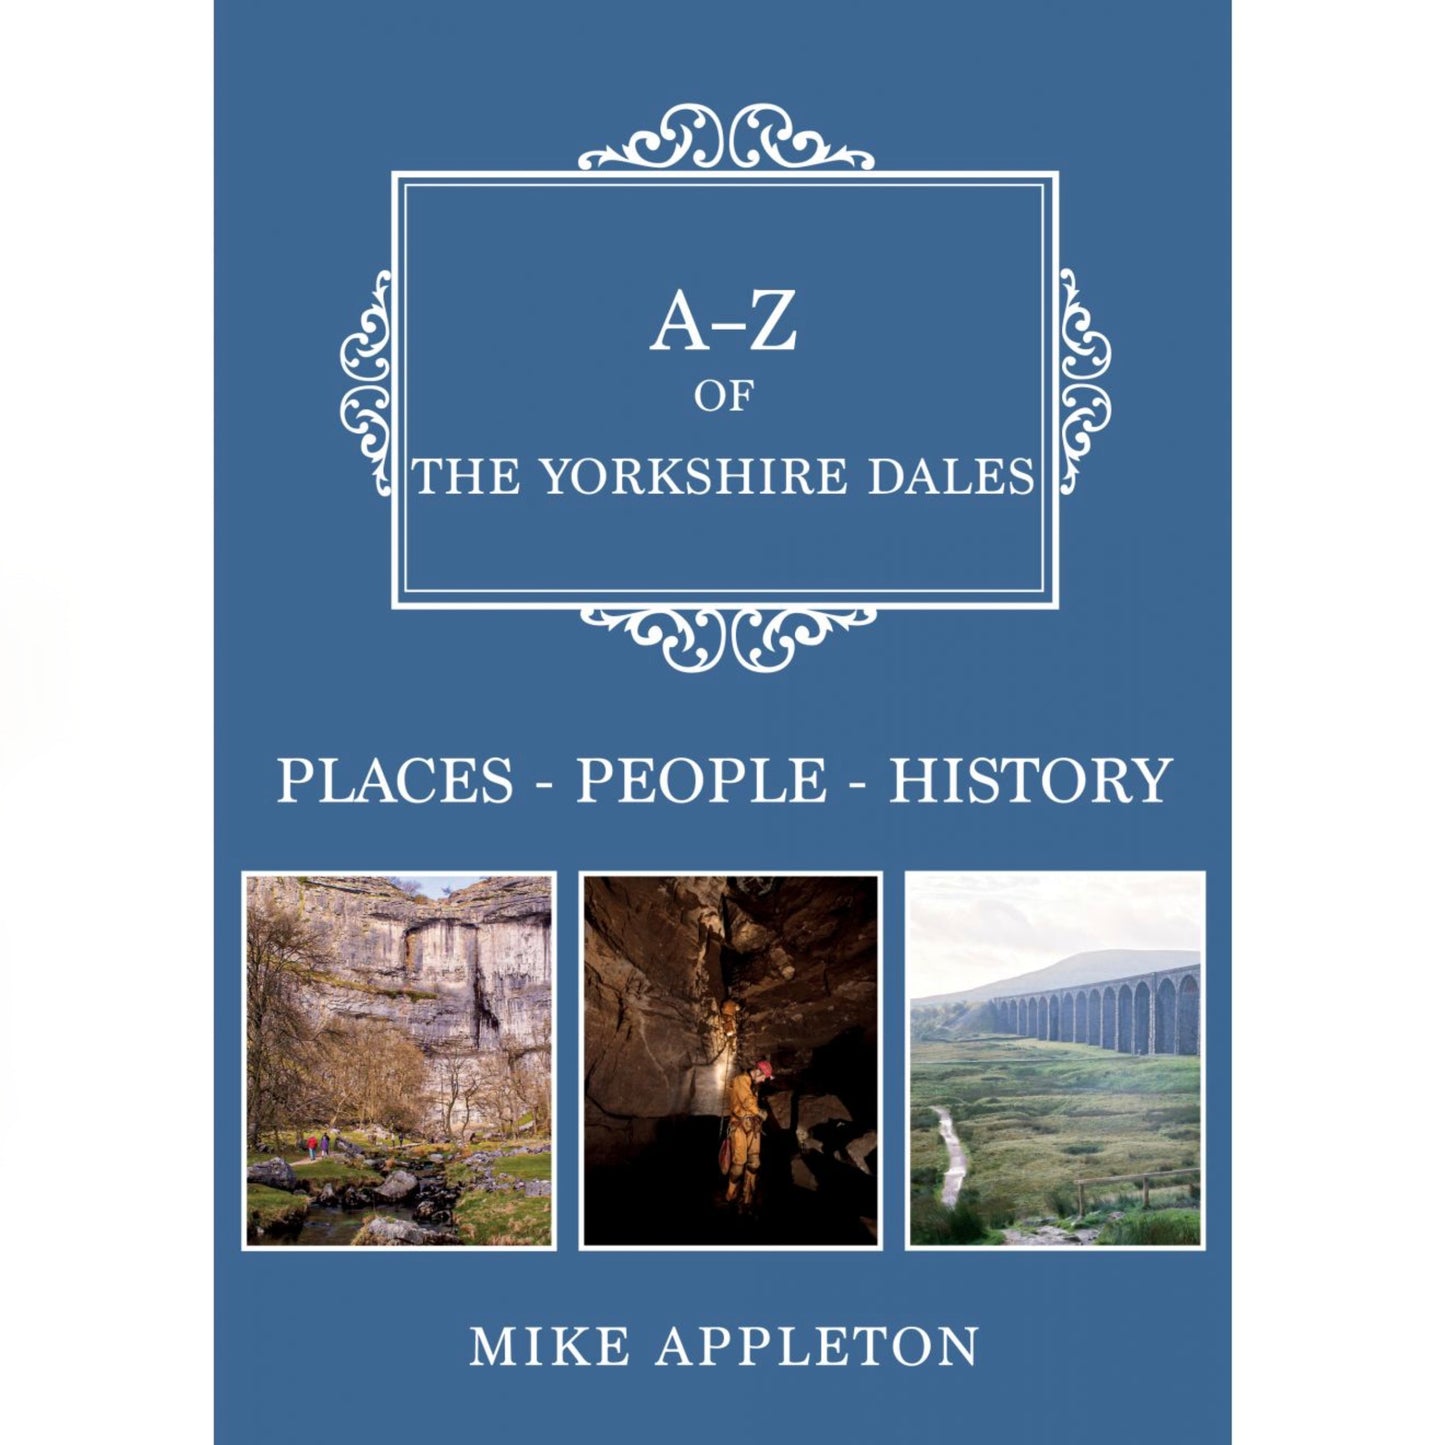 A-Z of The Yorkshire Dales Book - The Great Yorkshire Shop